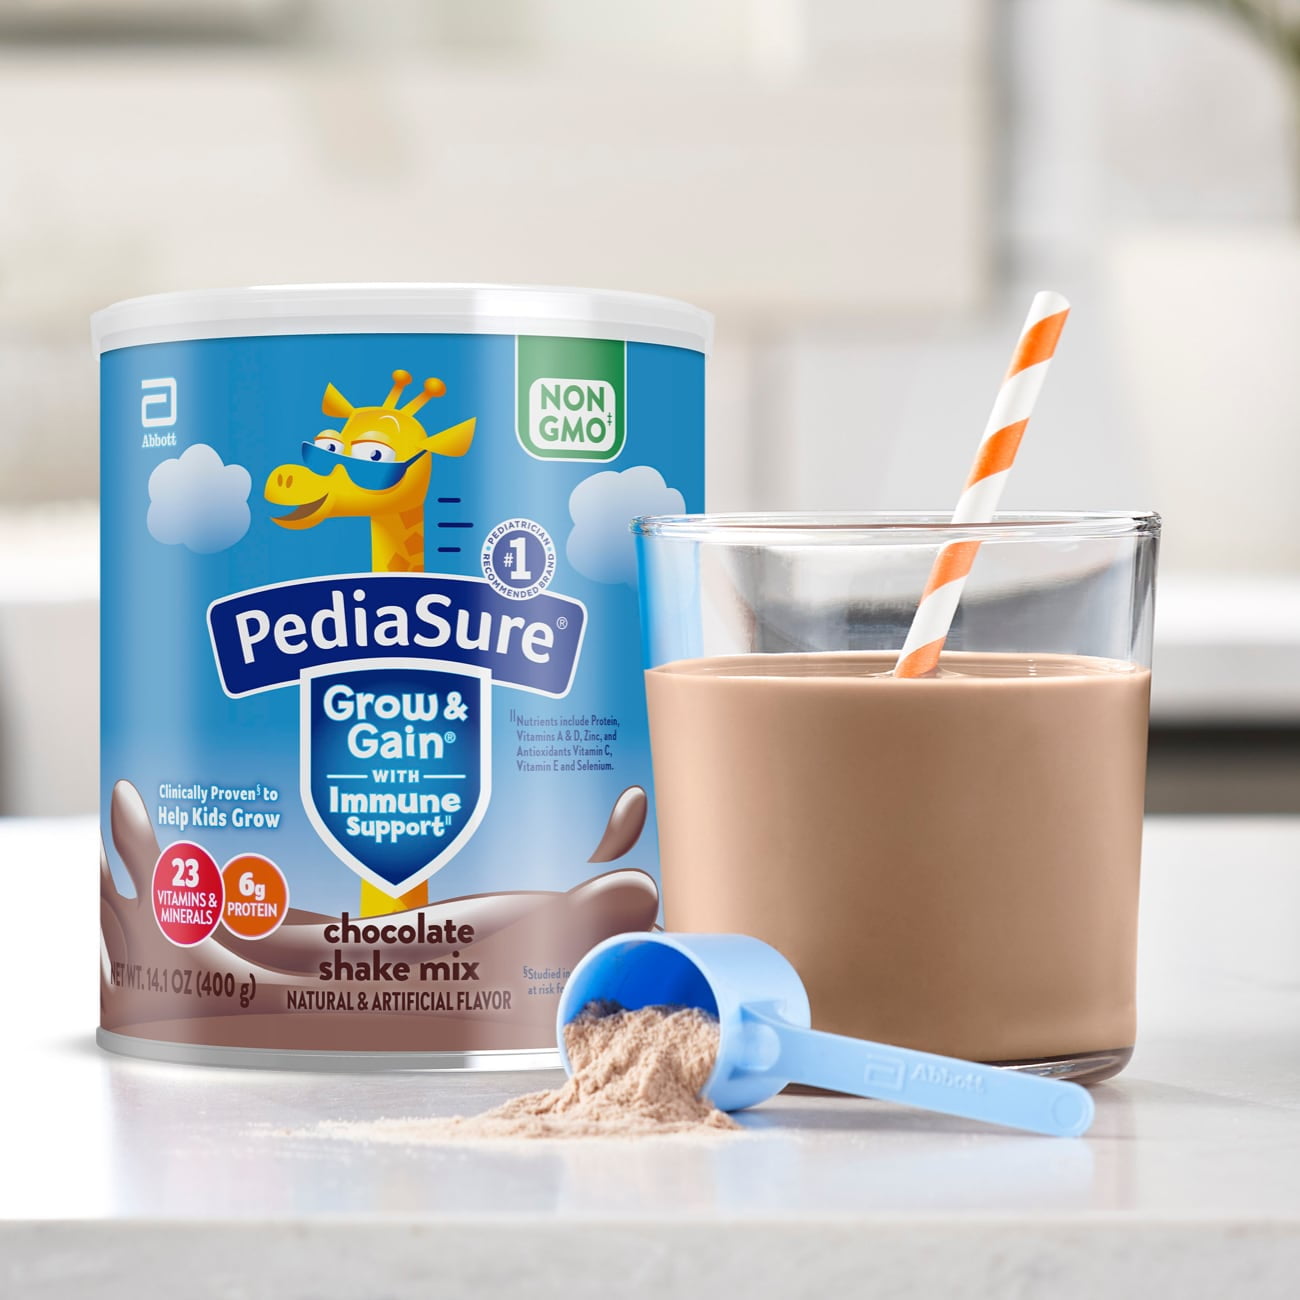 PediaSure 3+ Child Nutritional Supplement Chocolate 850g, Shop Today. Get  it Tomorrow!